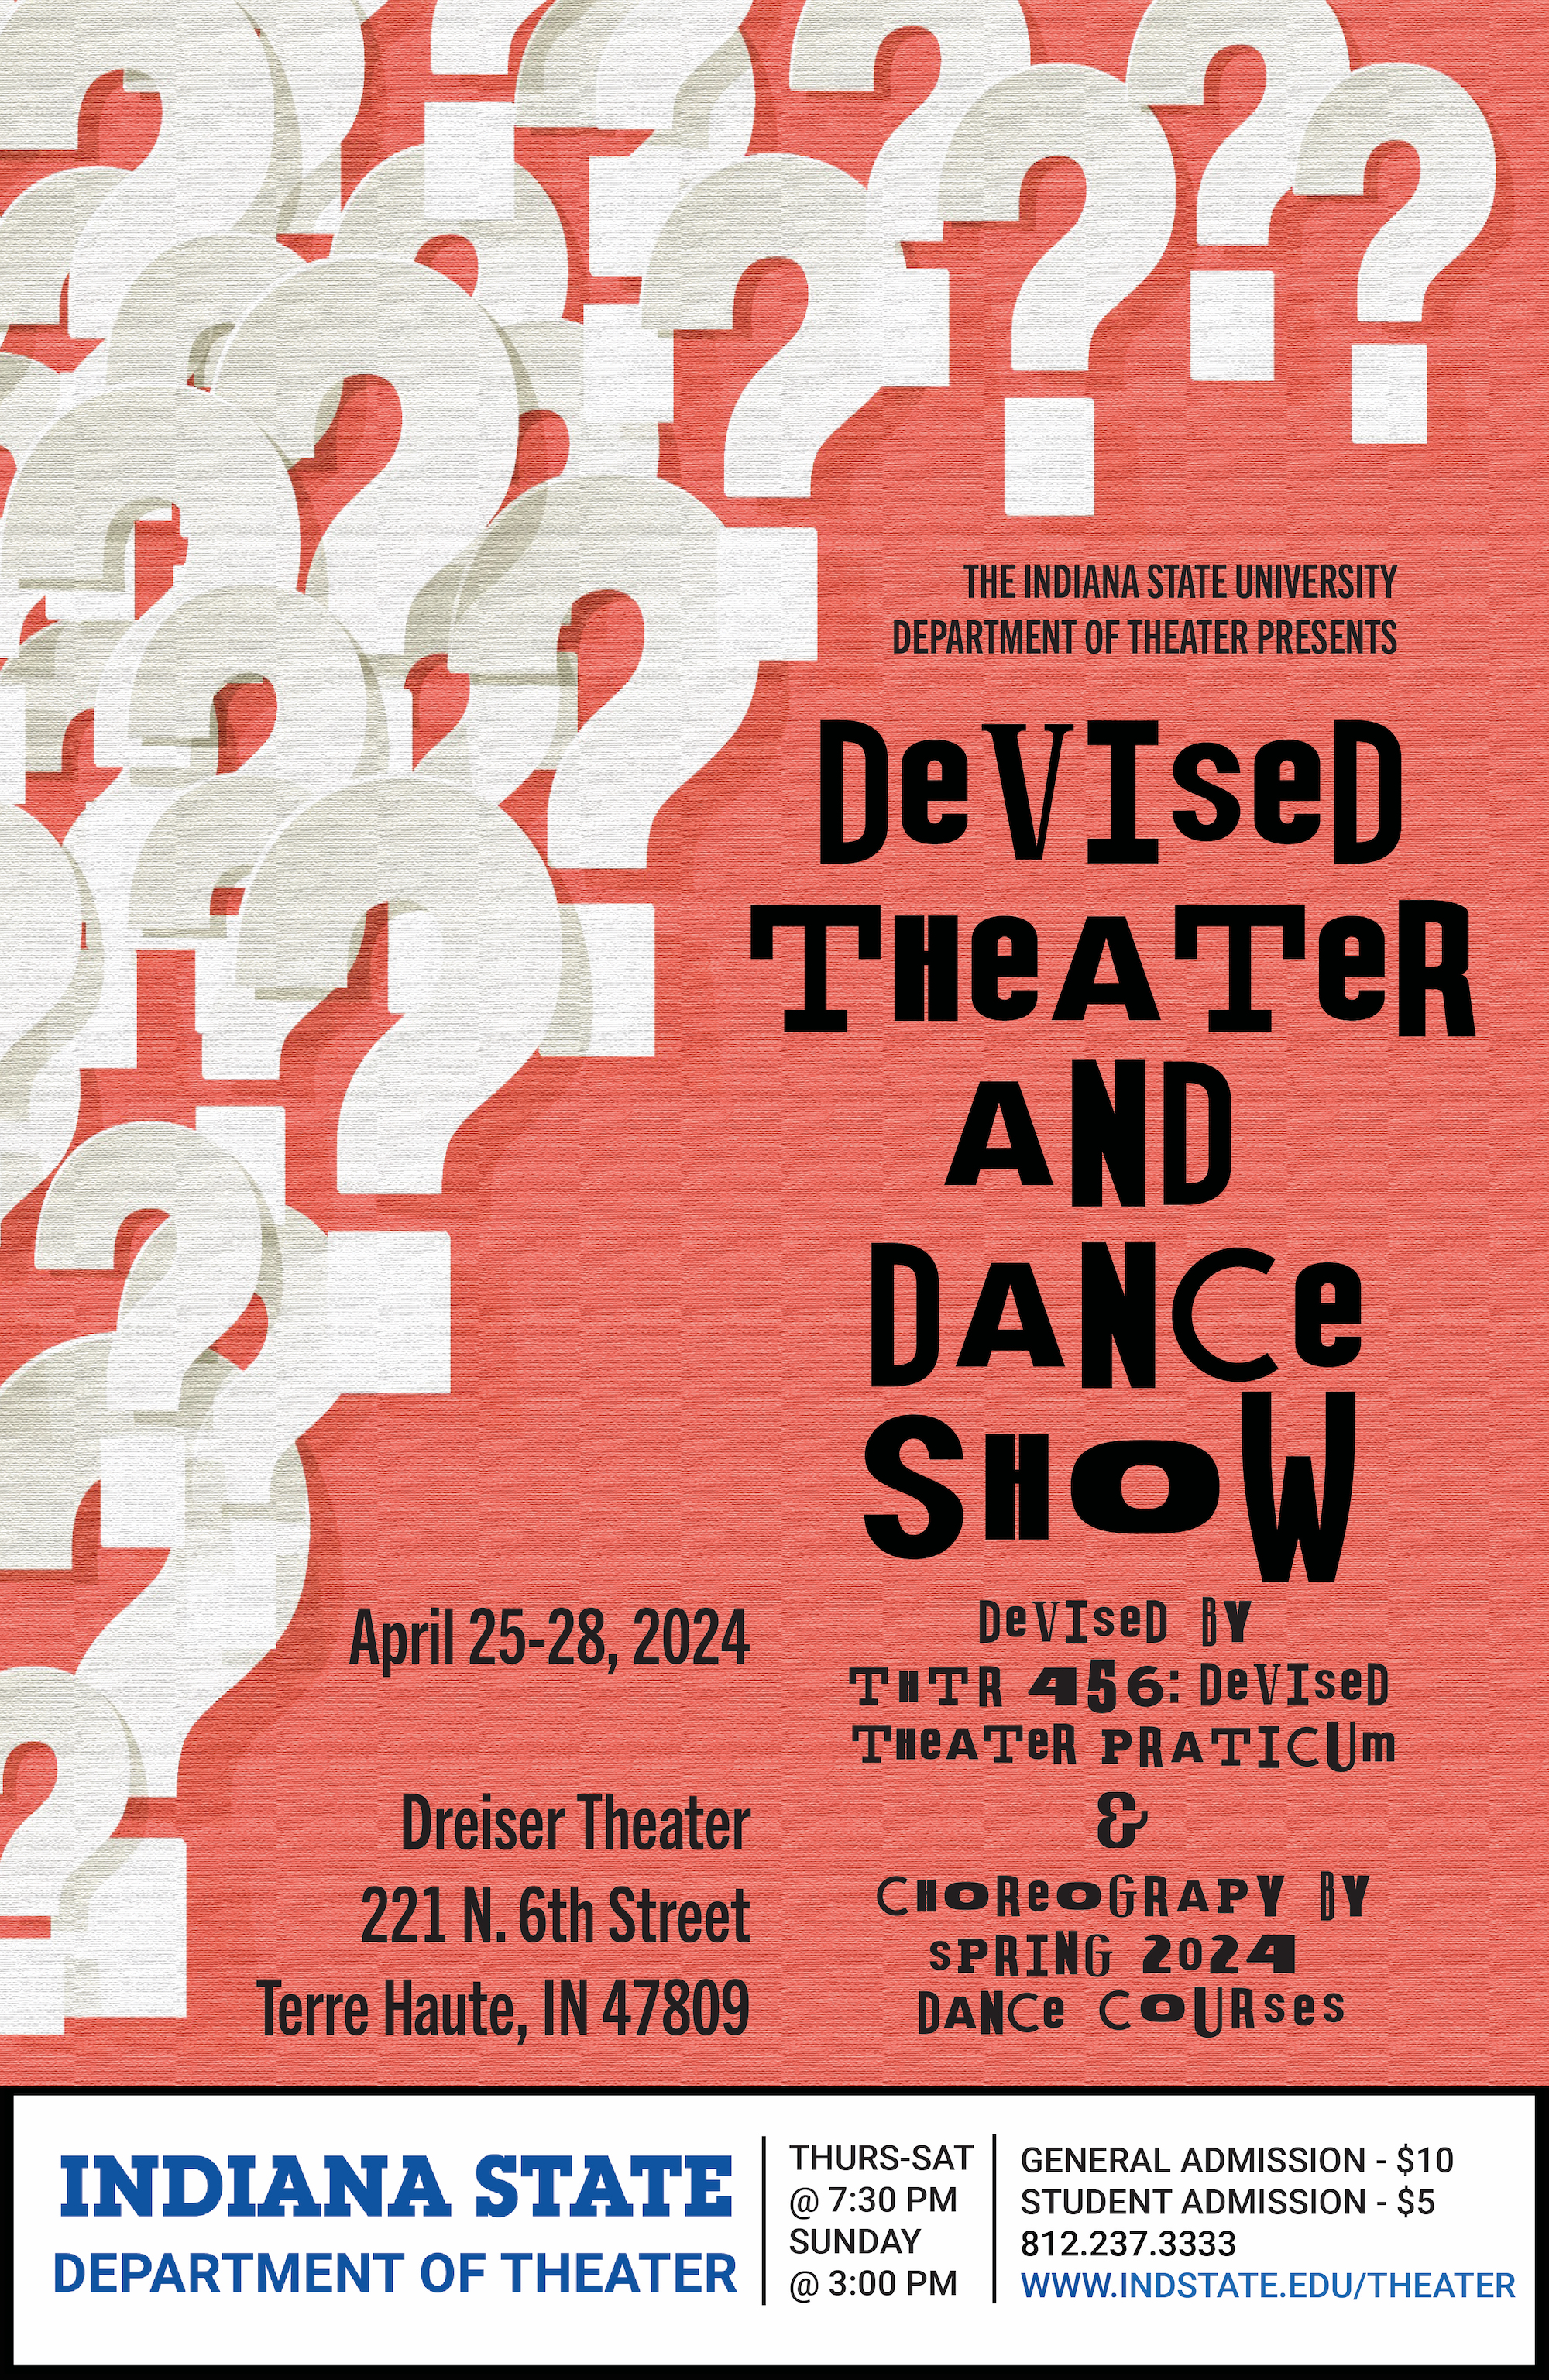 Devised Theater and Dance Show Poster